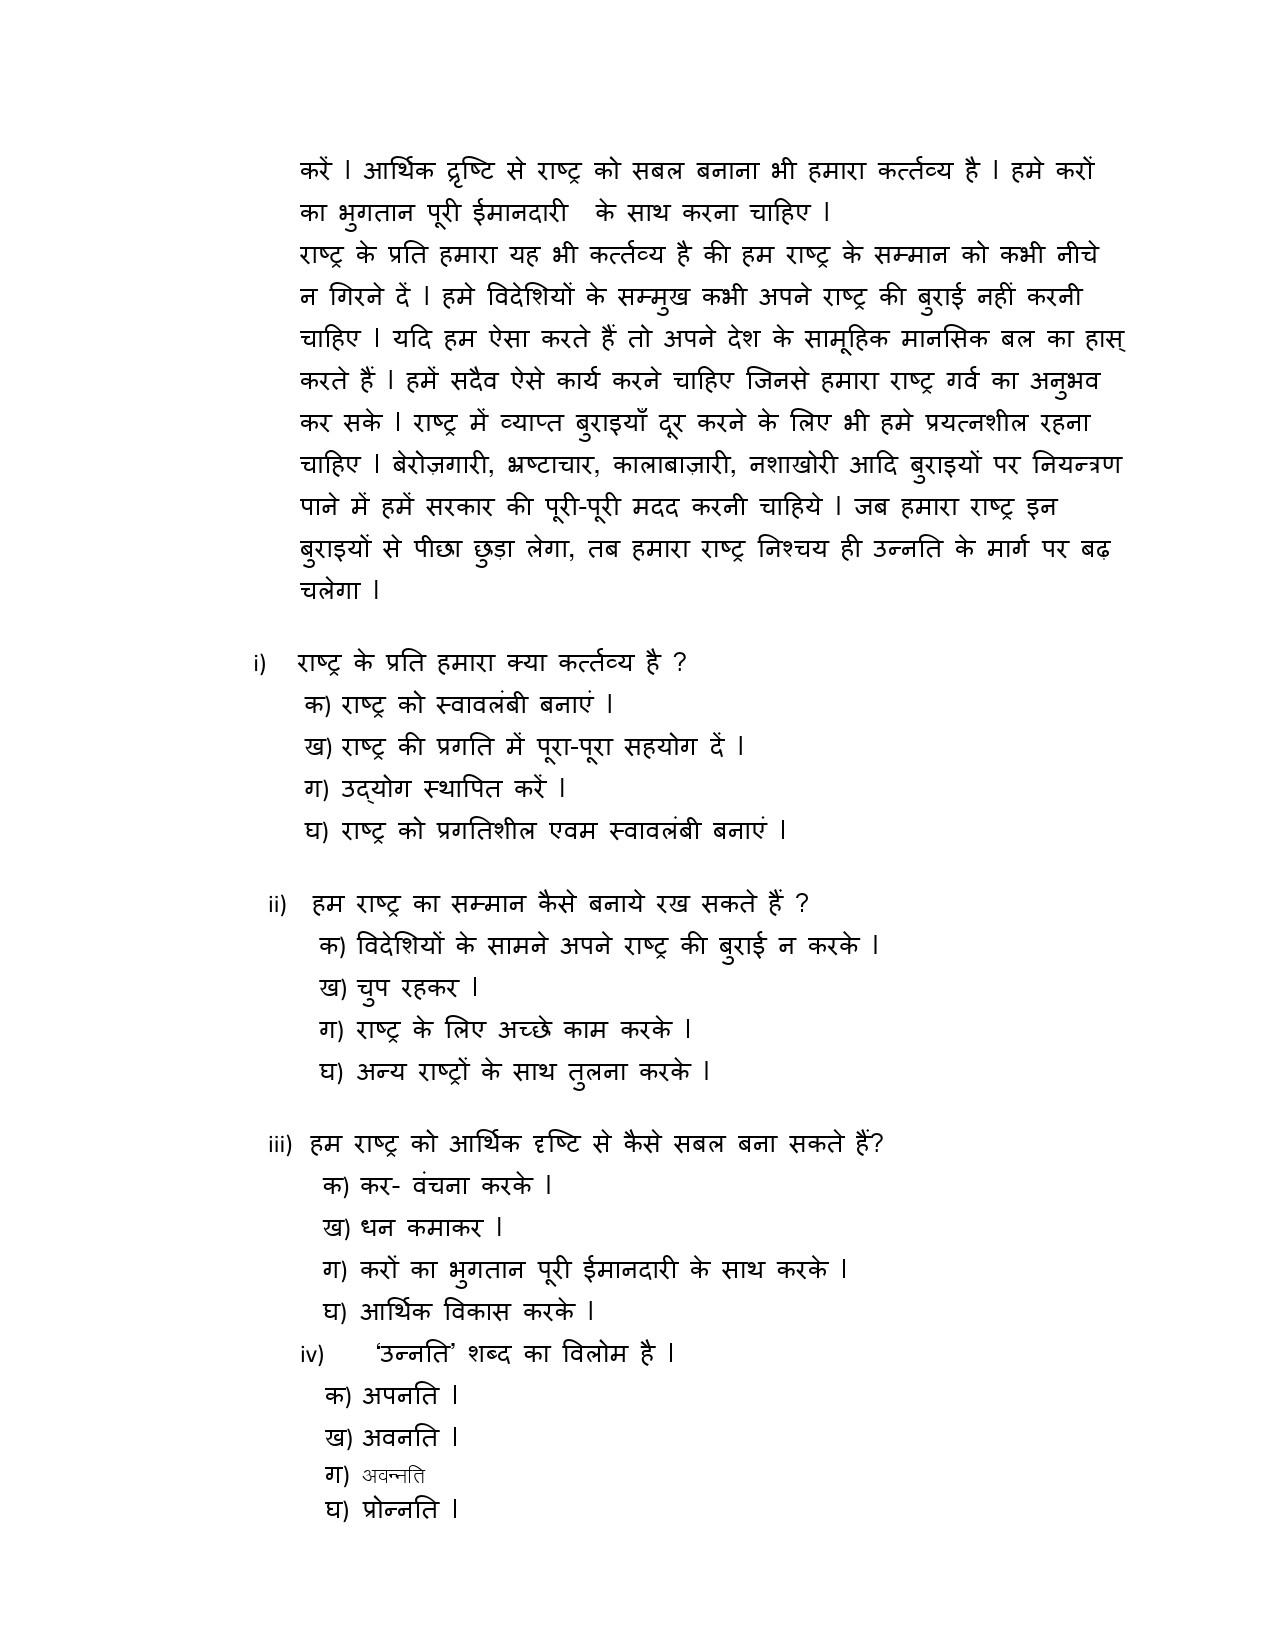 Hindi A CBSE Class X Sample Question Paper 2015 16 - Image 3